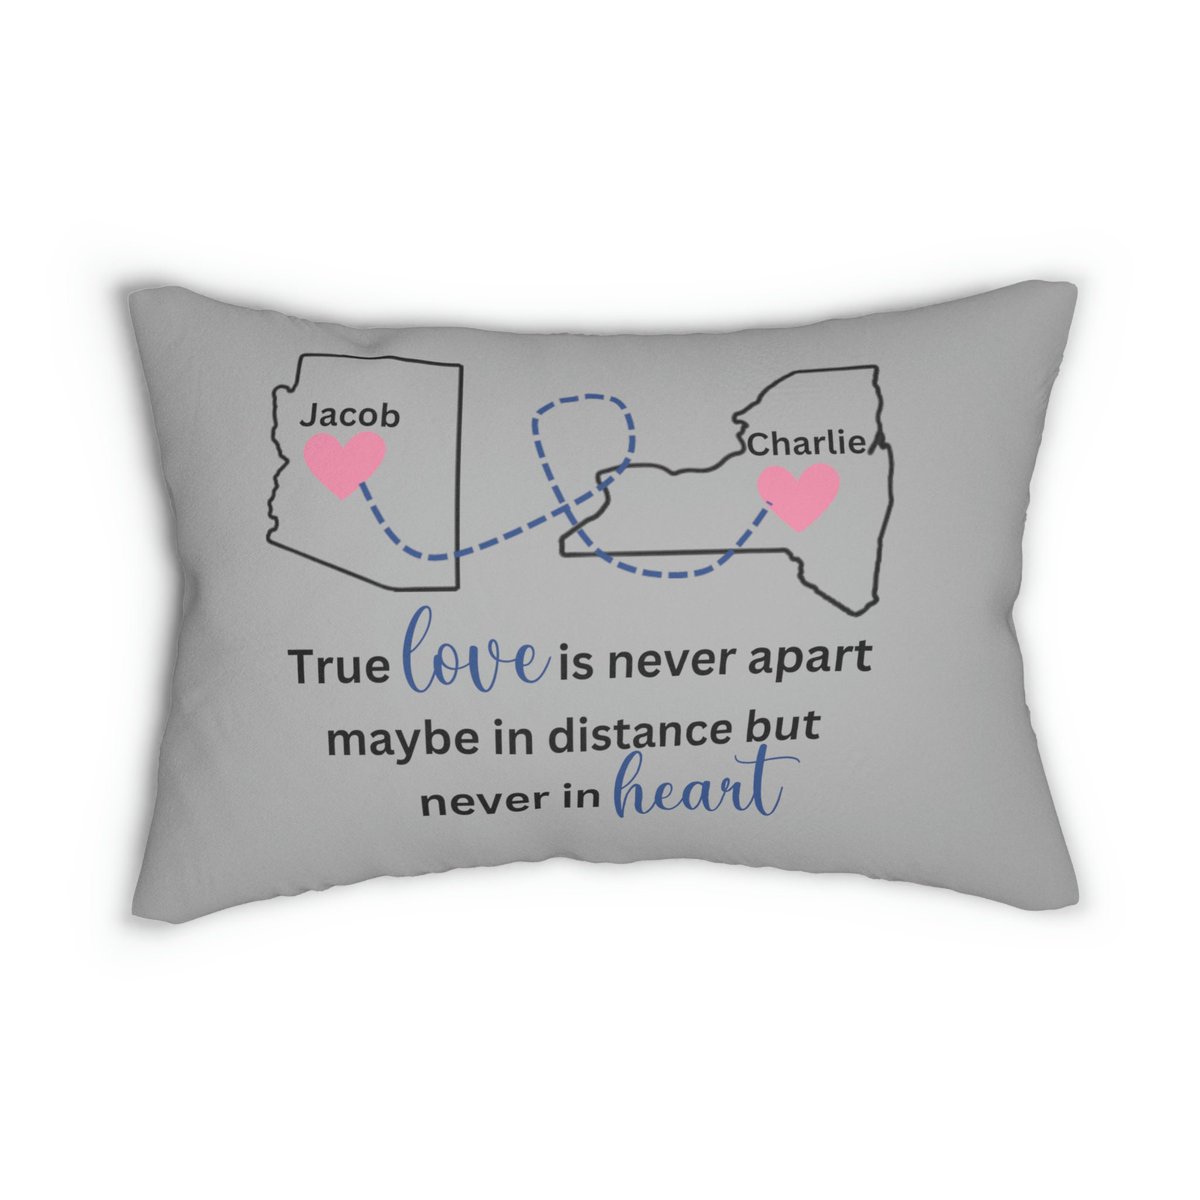 Personalized Long Distance Relationship Pillow Gift
#relationshipgift #leavinghome #longdistancegift #giftforboyfriend #customstates #giftforhim #longdistanceboyfriendgift #LDR #longdistancegirlfriendgift
CLICK HERE NOW TO BUY etsy.me/41amphn